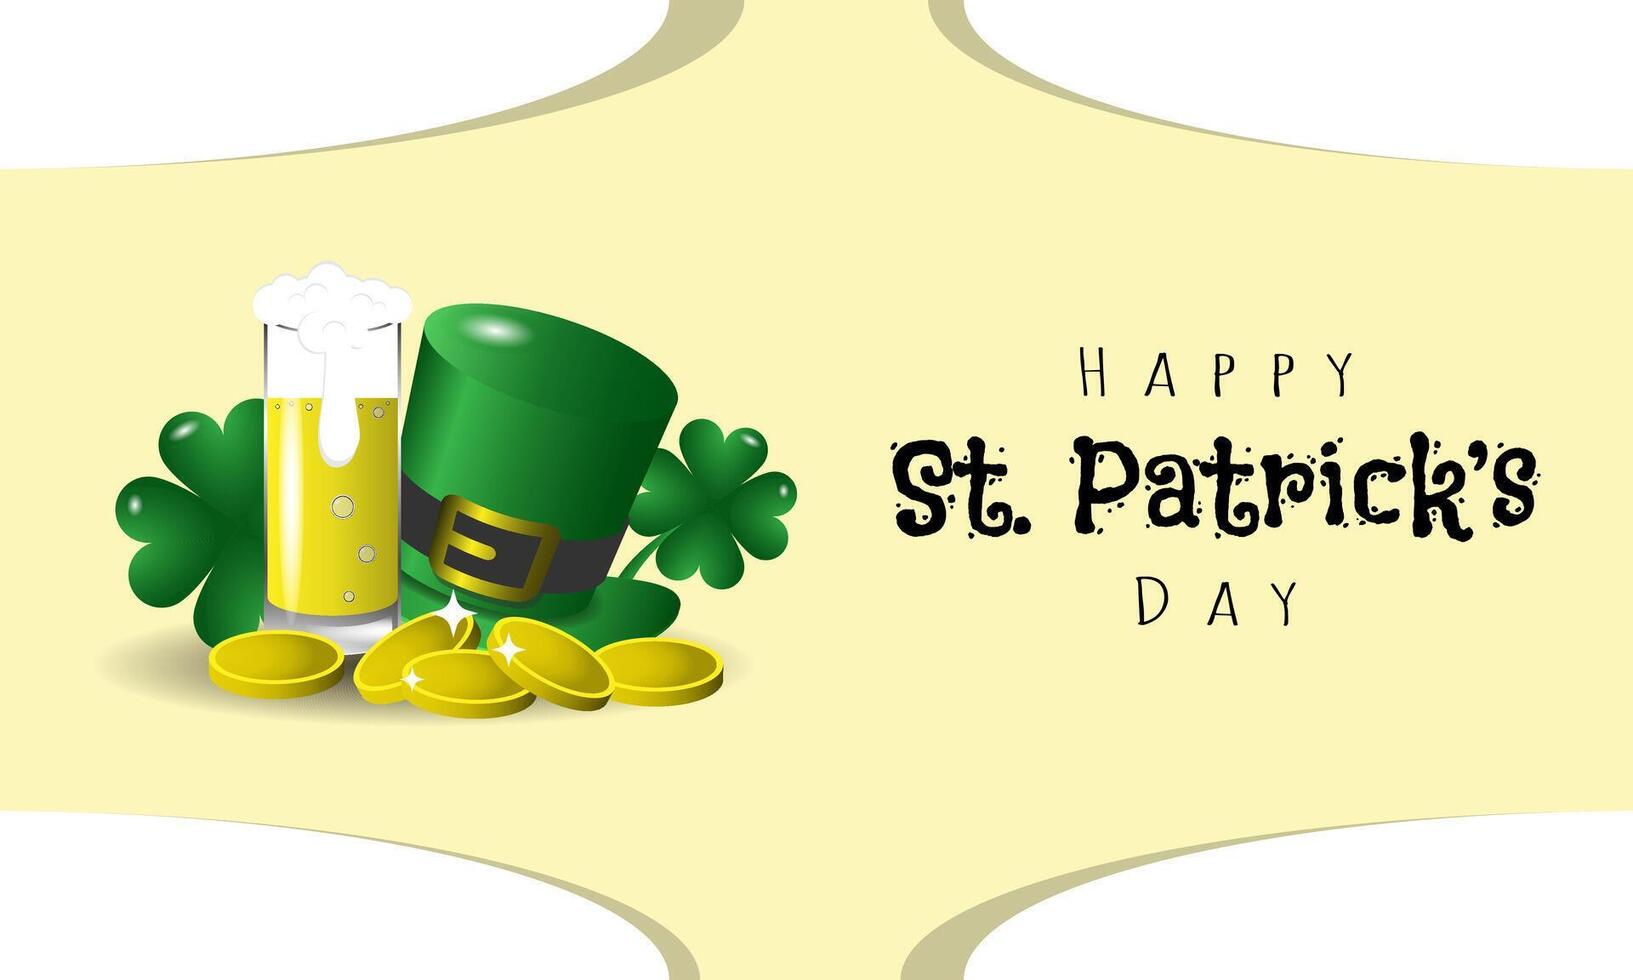 Happy St. Patrick's Day poster with hat and beer vector